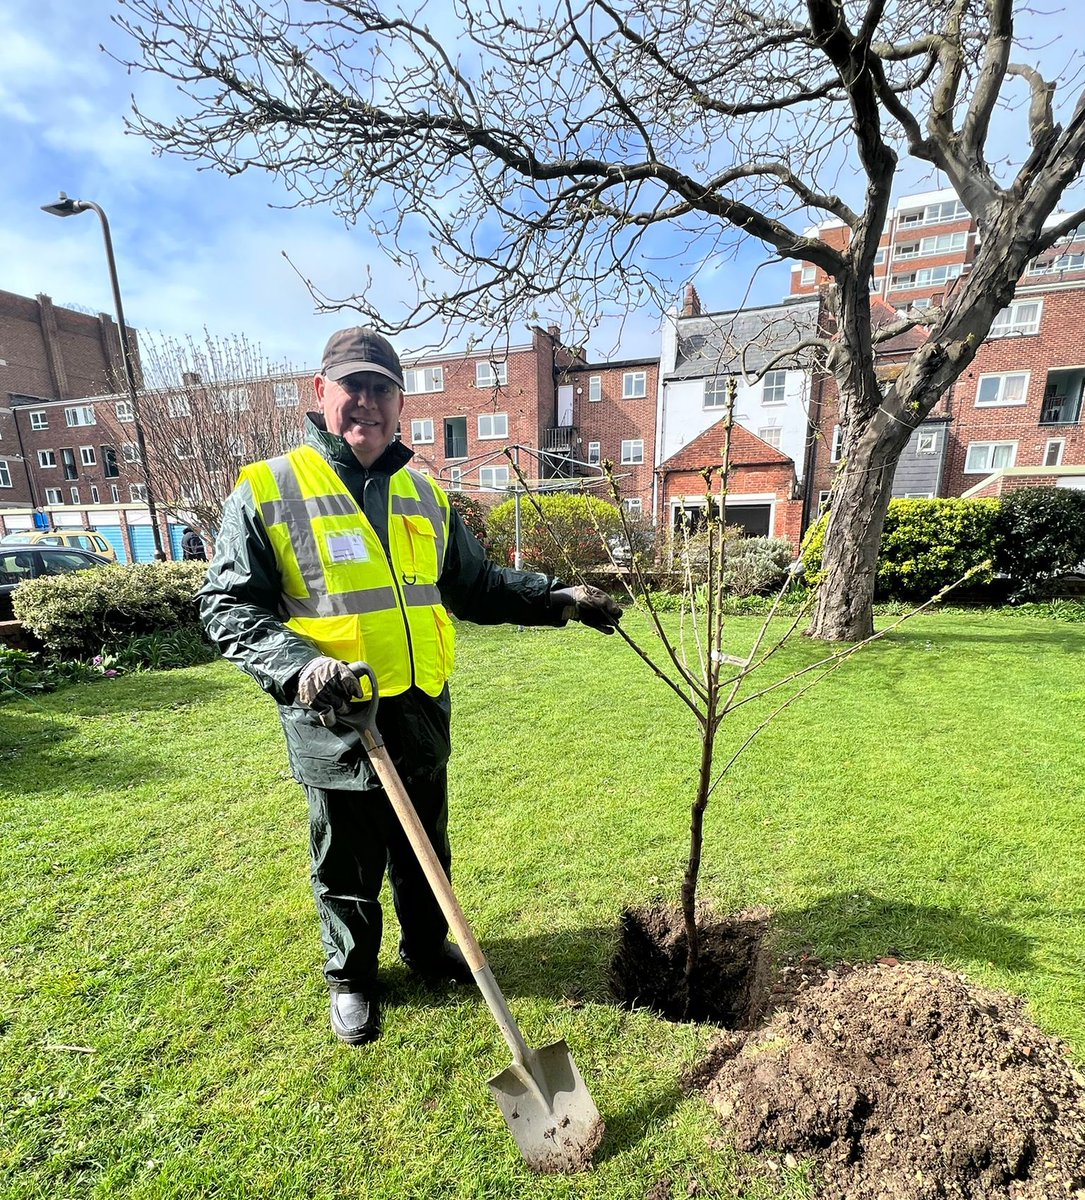 Trish and Dennis on 31 March at the Silver Street site planted a lovely shaped dwarf cherry tree after the Rudmore Roundabout planting